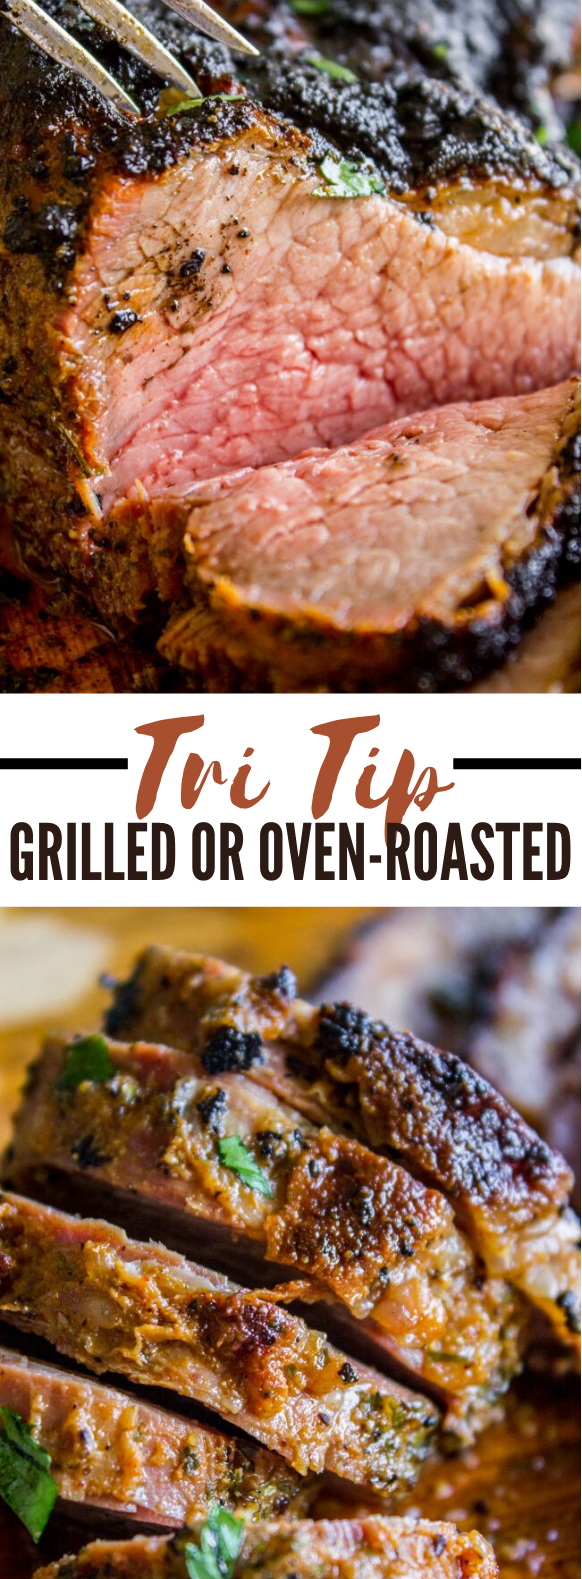 How to Cook Tri Tip (Grilled or Oven-Roasted) #dinner #christmas